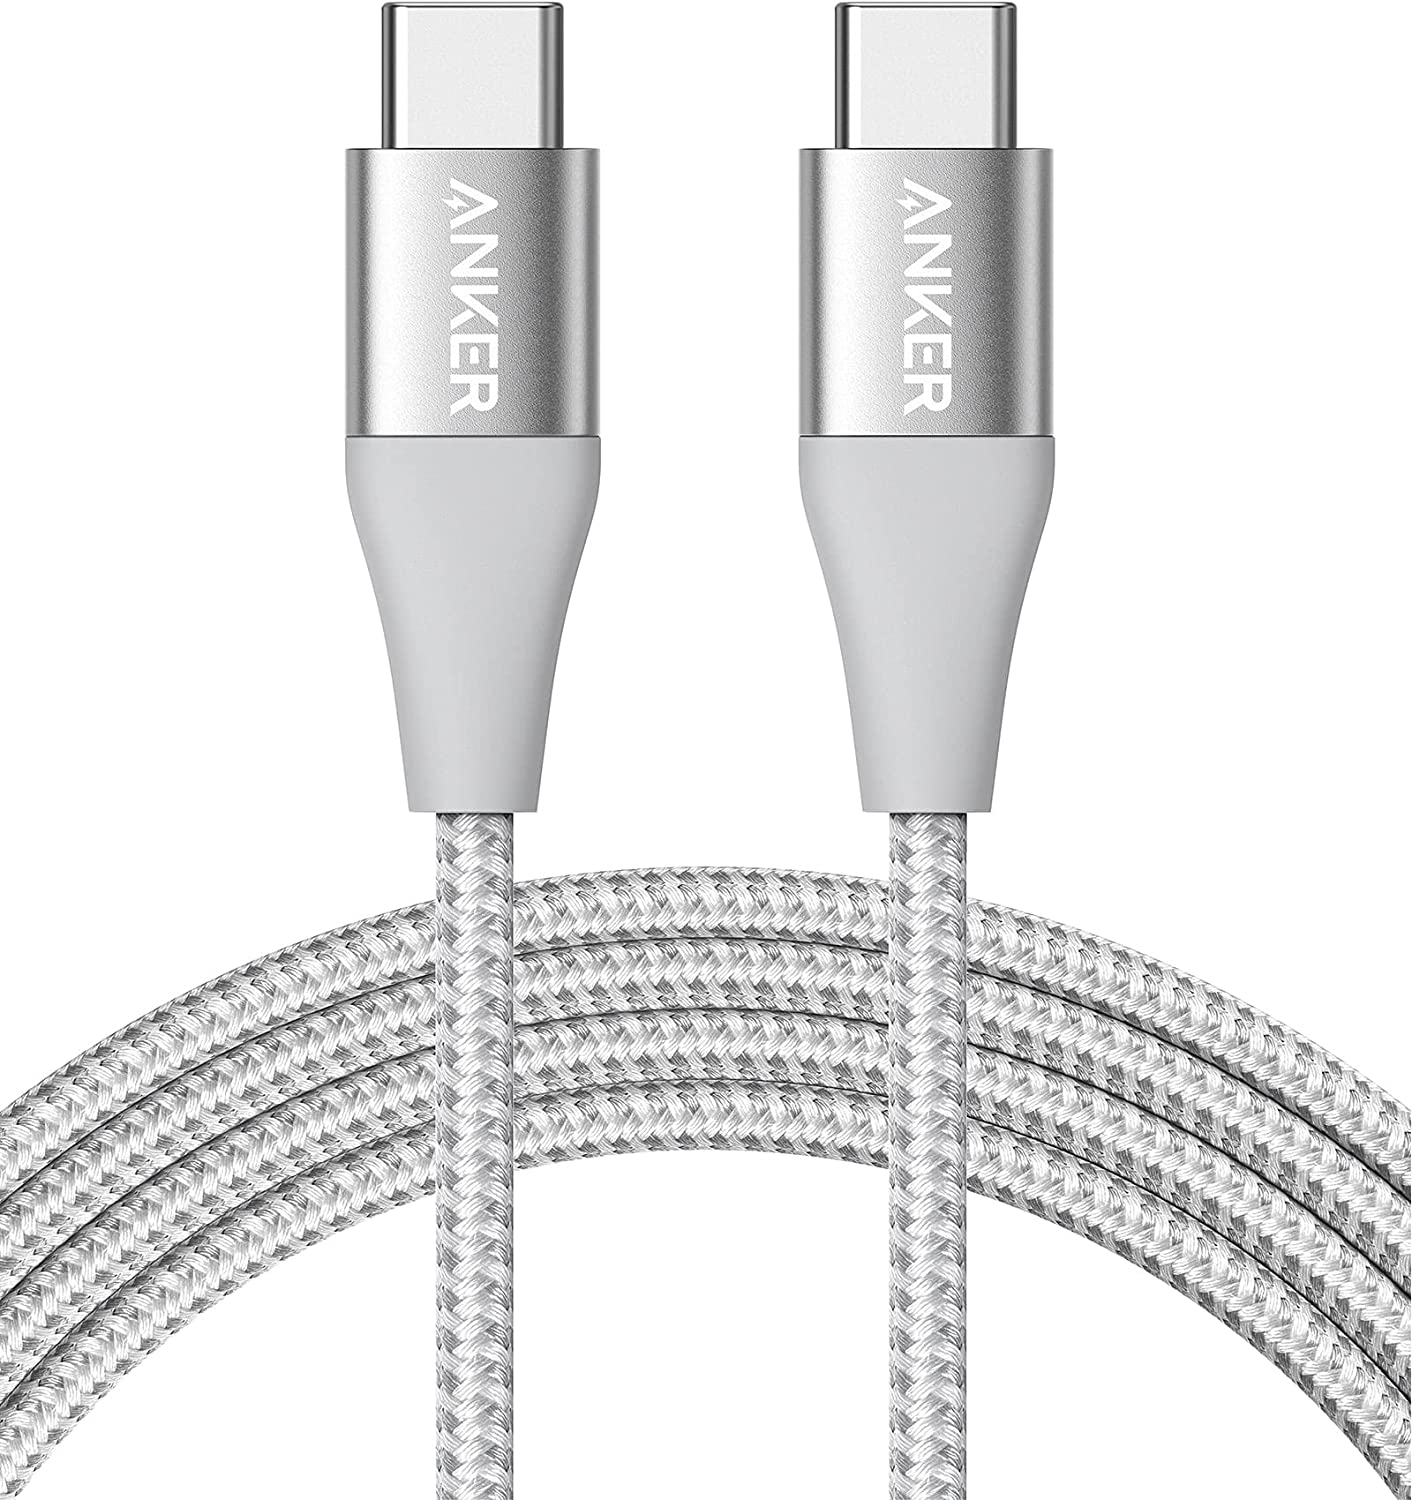 Anker Powerline+ II USB C to USB C Cable (6ft, 60W) Silver/Red Color $8.99 + Free Shipping w/ Prime or Orders $25+